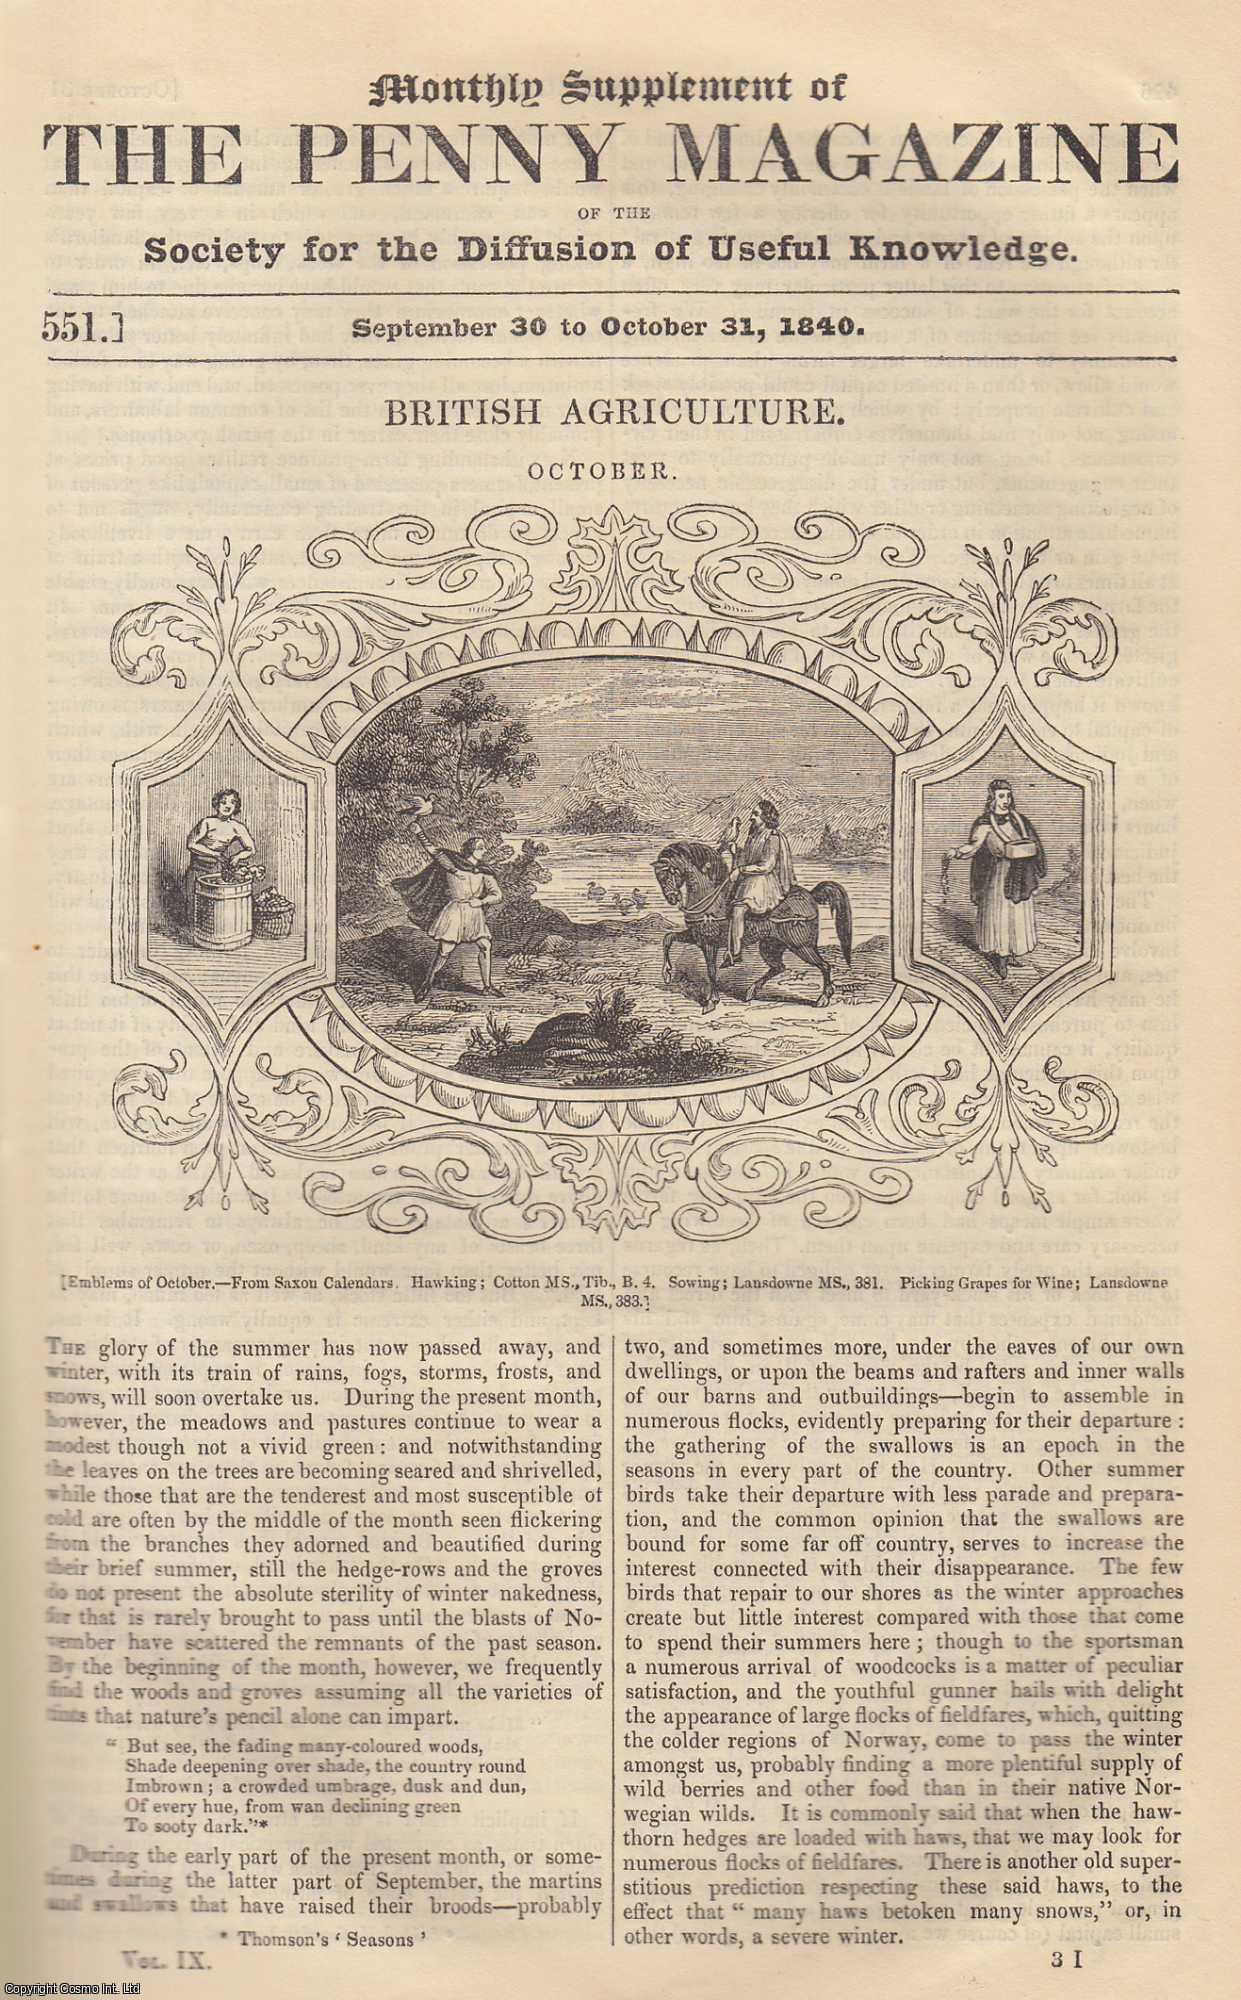 --- - British Agriculture (October). Issue No. 551, October 31st, 1840. A complete rare weekly issue of the Penny Magazine, 1840.